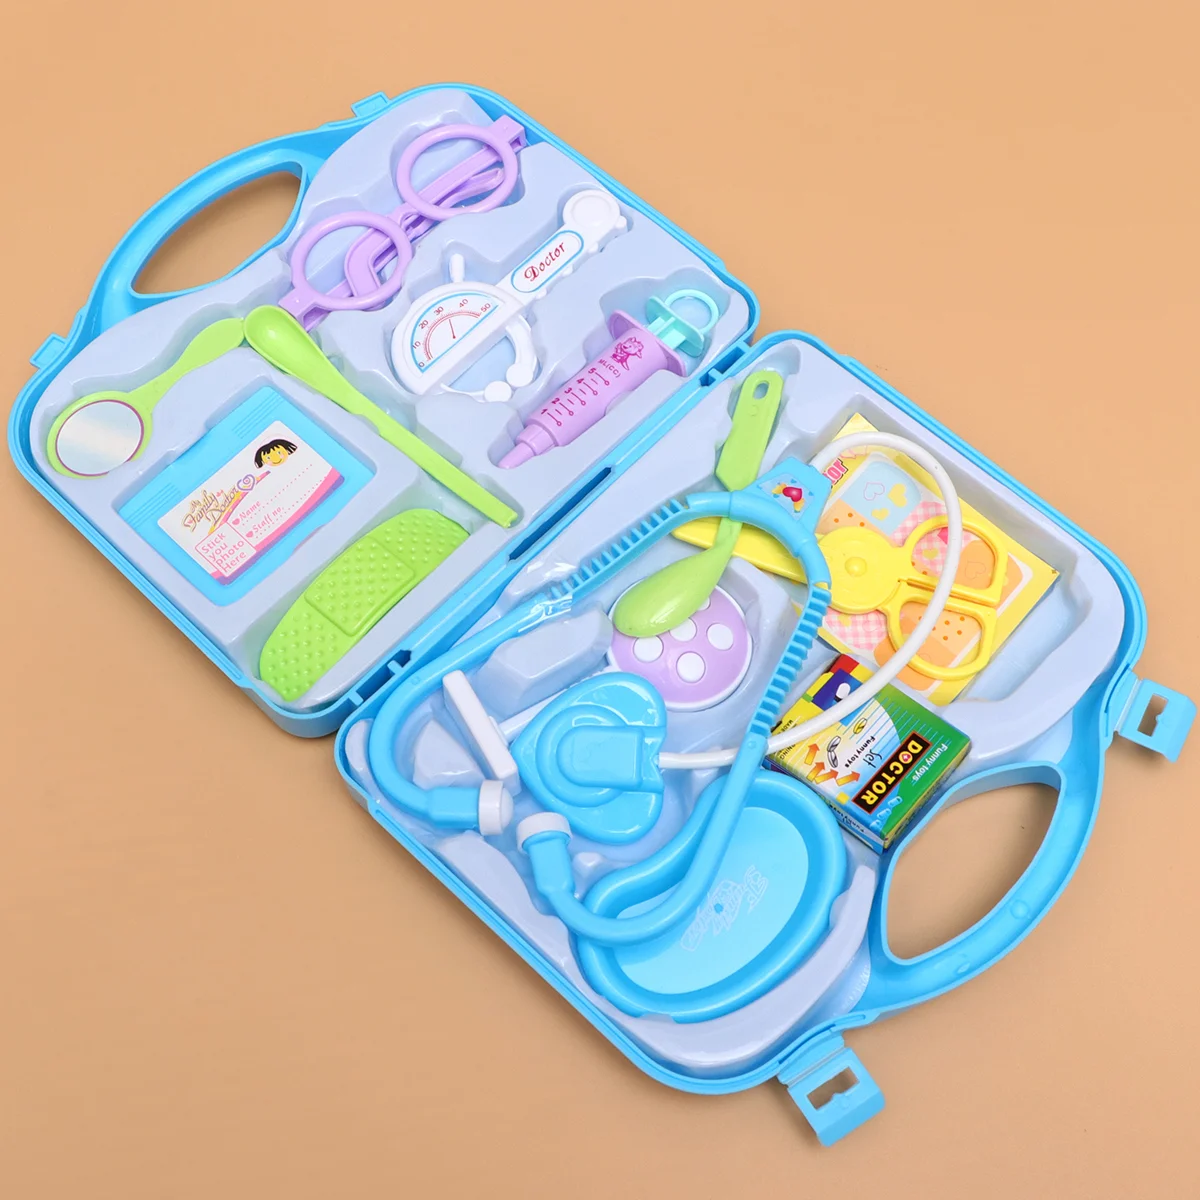 

14 Pcs Childrens Toys Mini Doctor Educational Stethoscope Kids Pretend Play Accessories Role Props Funny